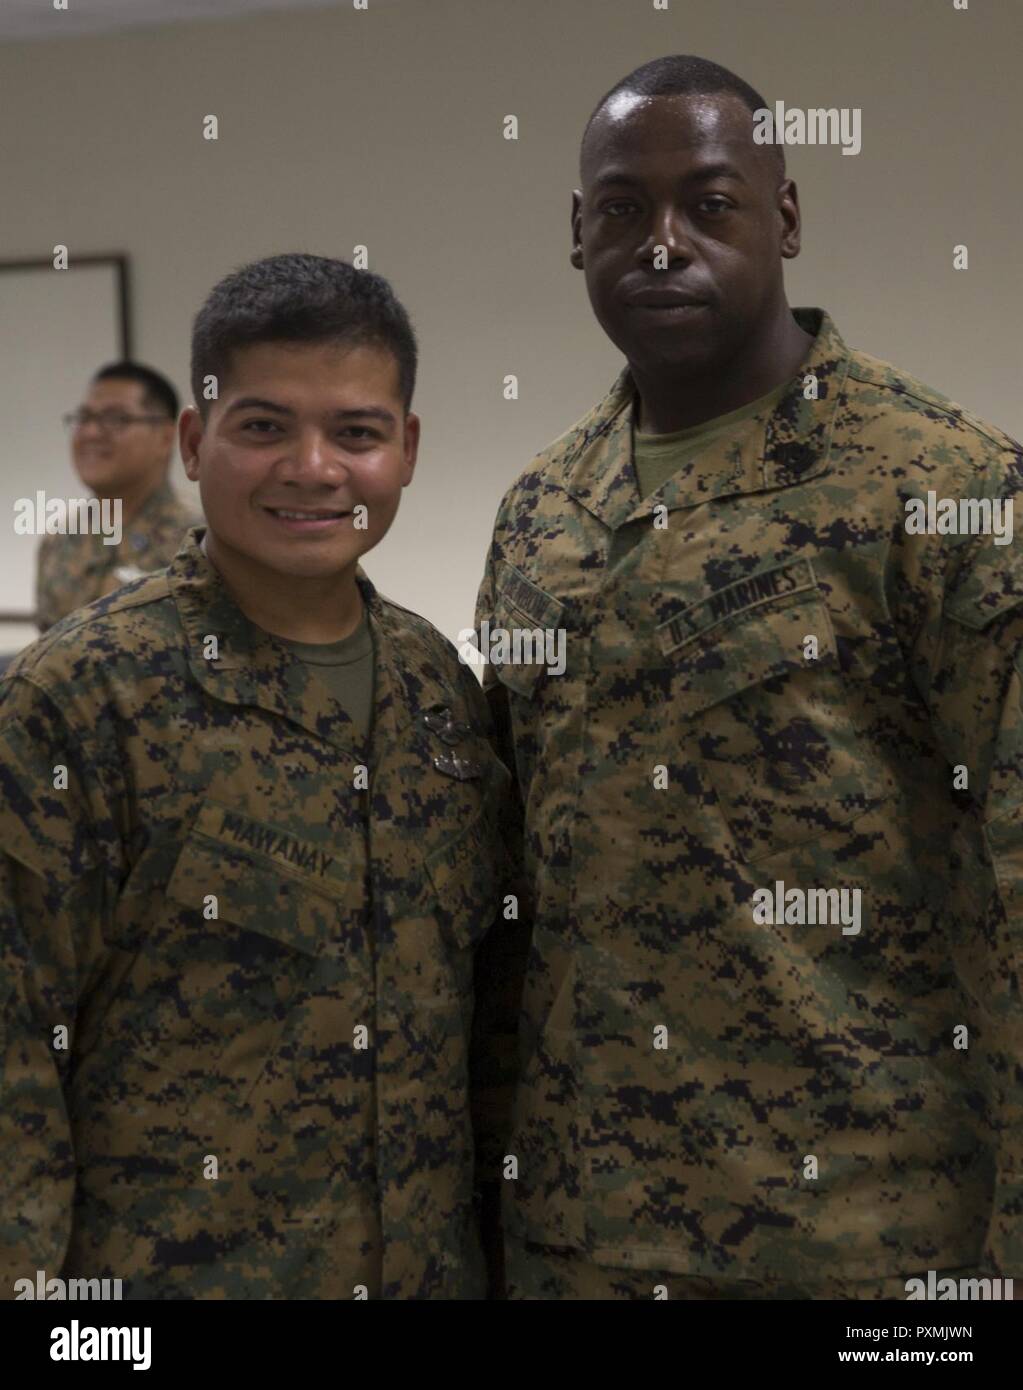 Ensign Freddie B. Mawanay, left, the medical detachments officer in charge, assigned to 3rd Medical Battalion, 3rd Marine Logistics Group, III Marine Expeditionary Force, and 1st Sgt. Derrick Benbow, right, senior enlisted advisor of 3rd Law Enforcement Battalion, III Marine Headquarters Group, III MEF, enjoys the celebration for the 119th birthday of the hospital corpsman rate at Camp Mujuk, Pohang, Republic of Korea, June 17, 2017. Marines from Bravo Company, 3rd Law Enforcement Battalion, III Marine Headquarters Group, III MEF and Corpsmen with 3rd Med Bn, 3rd MLG, III MEF came together to  Stock Photo